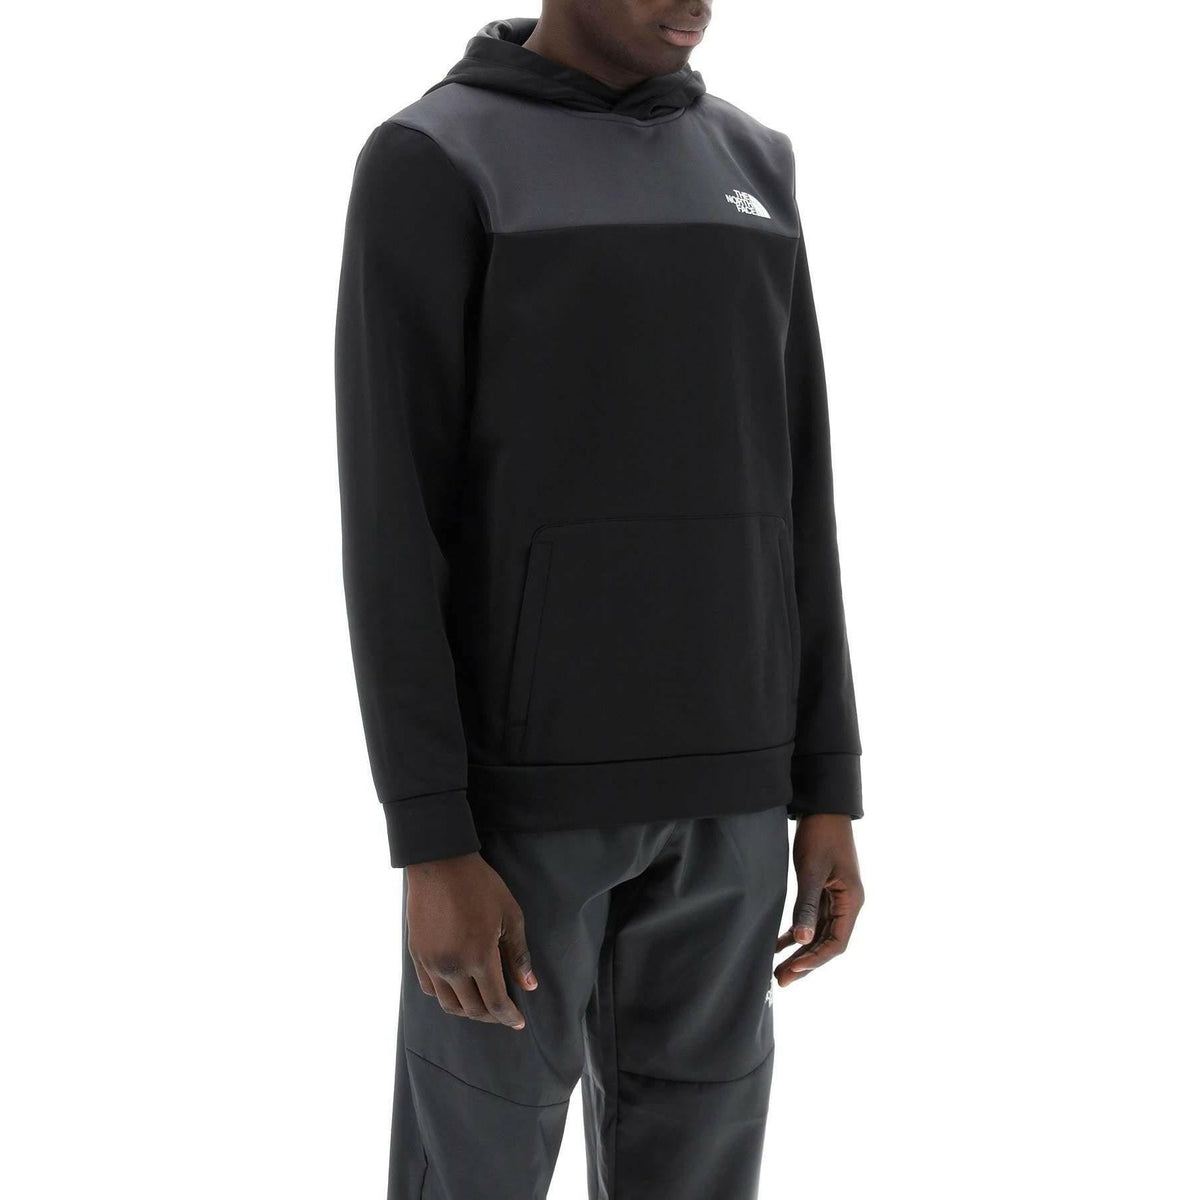 THE NORTH FACE - The North Face Black and Asphalt Gray Reaxion Hooded Sweater - JOHN JULIA